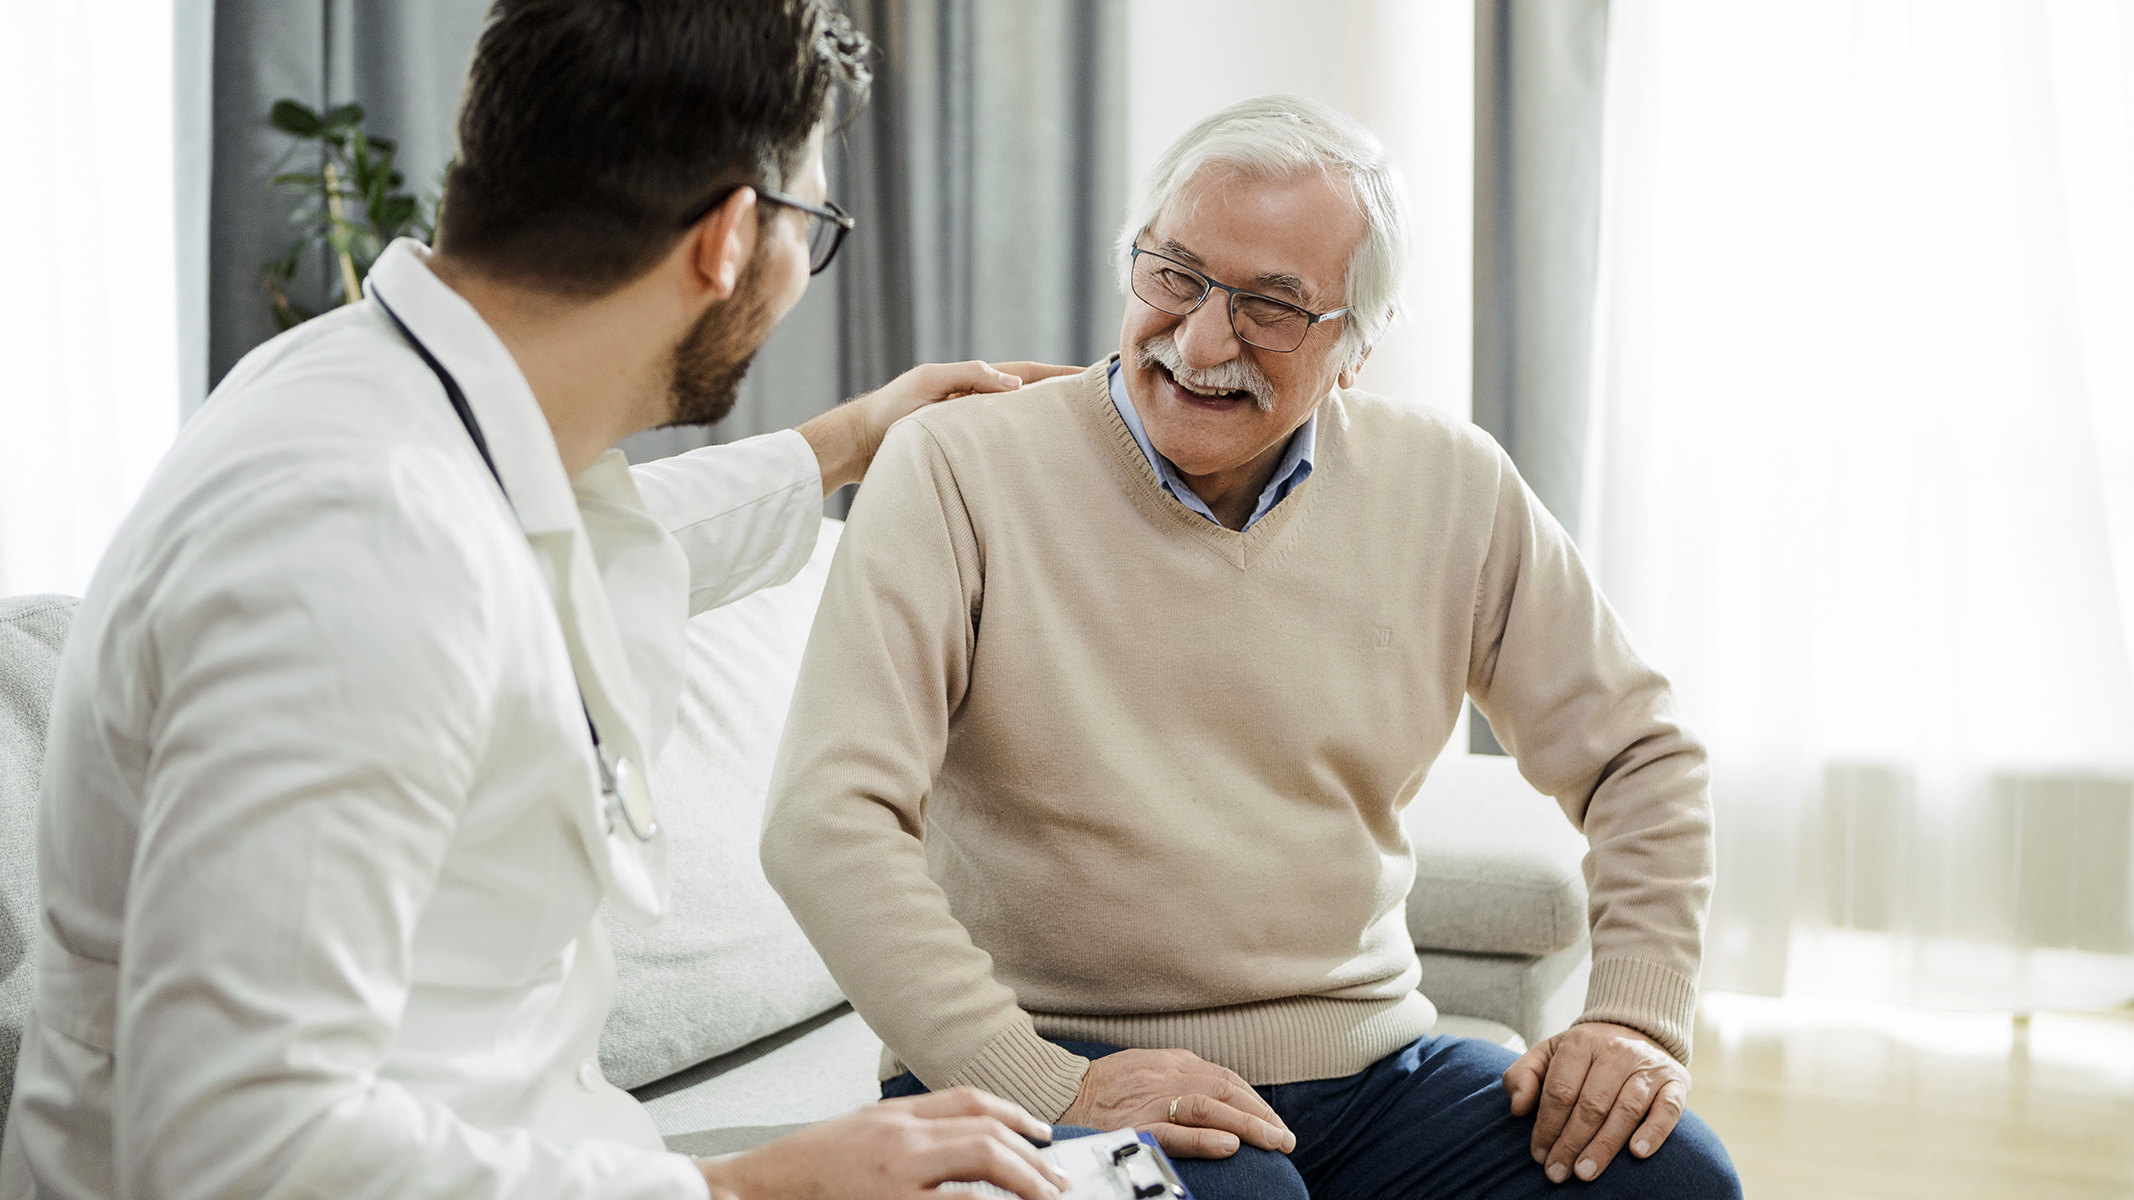 Senior man smiling with doctor